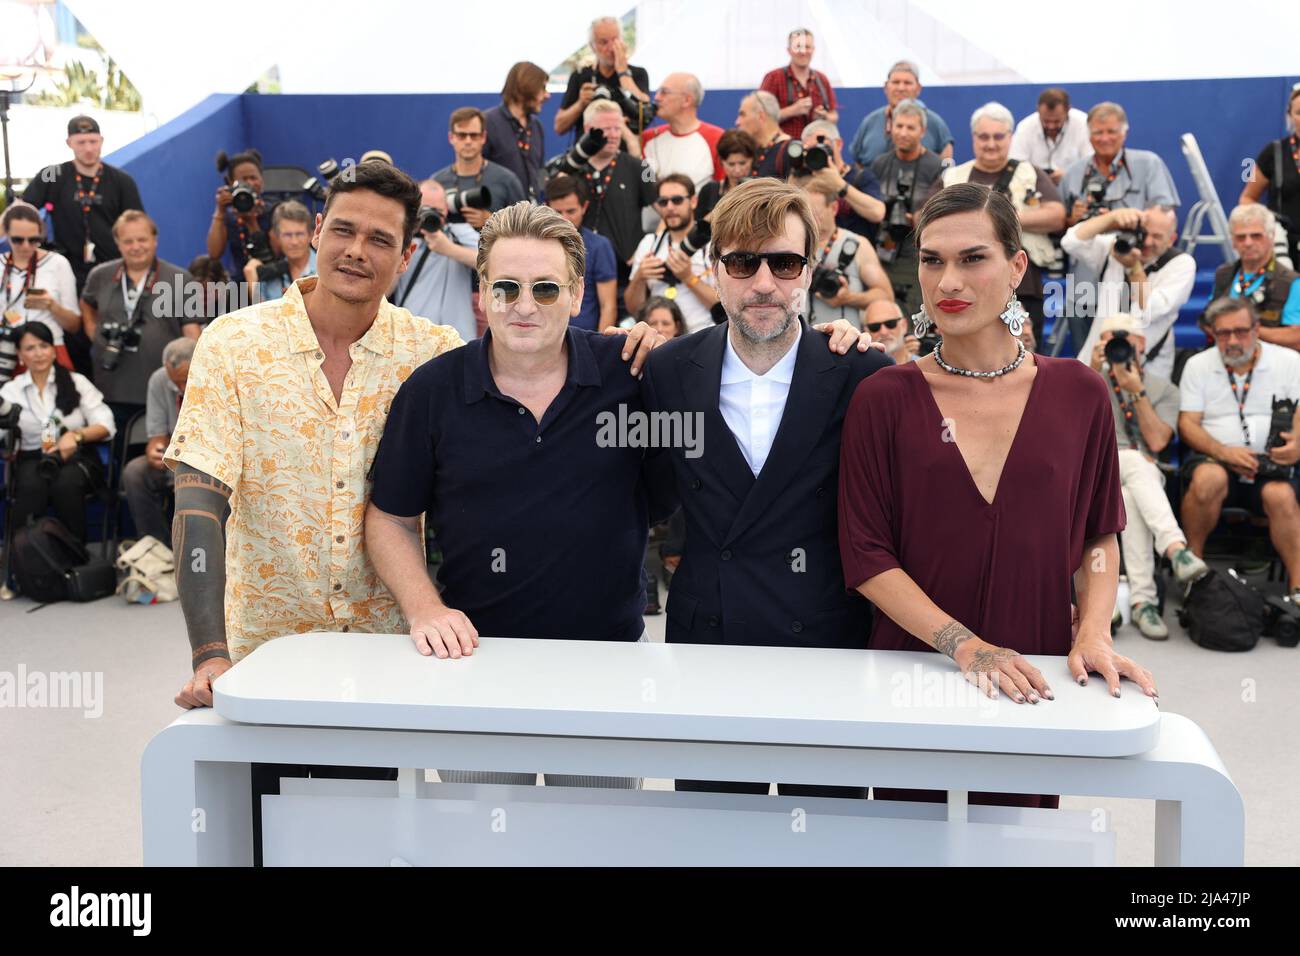 Matahi Pambrun, Benoît Magimel, Albert Serra and Pahoa Mahagafanau attending the photocall for 'Pacification' during the 75th annual Cannes film festival at Palais des Festivals on May 27, 2022 in Cannes, France. Photo by David Boyer/ABACAPRESS.COM Stock Photo